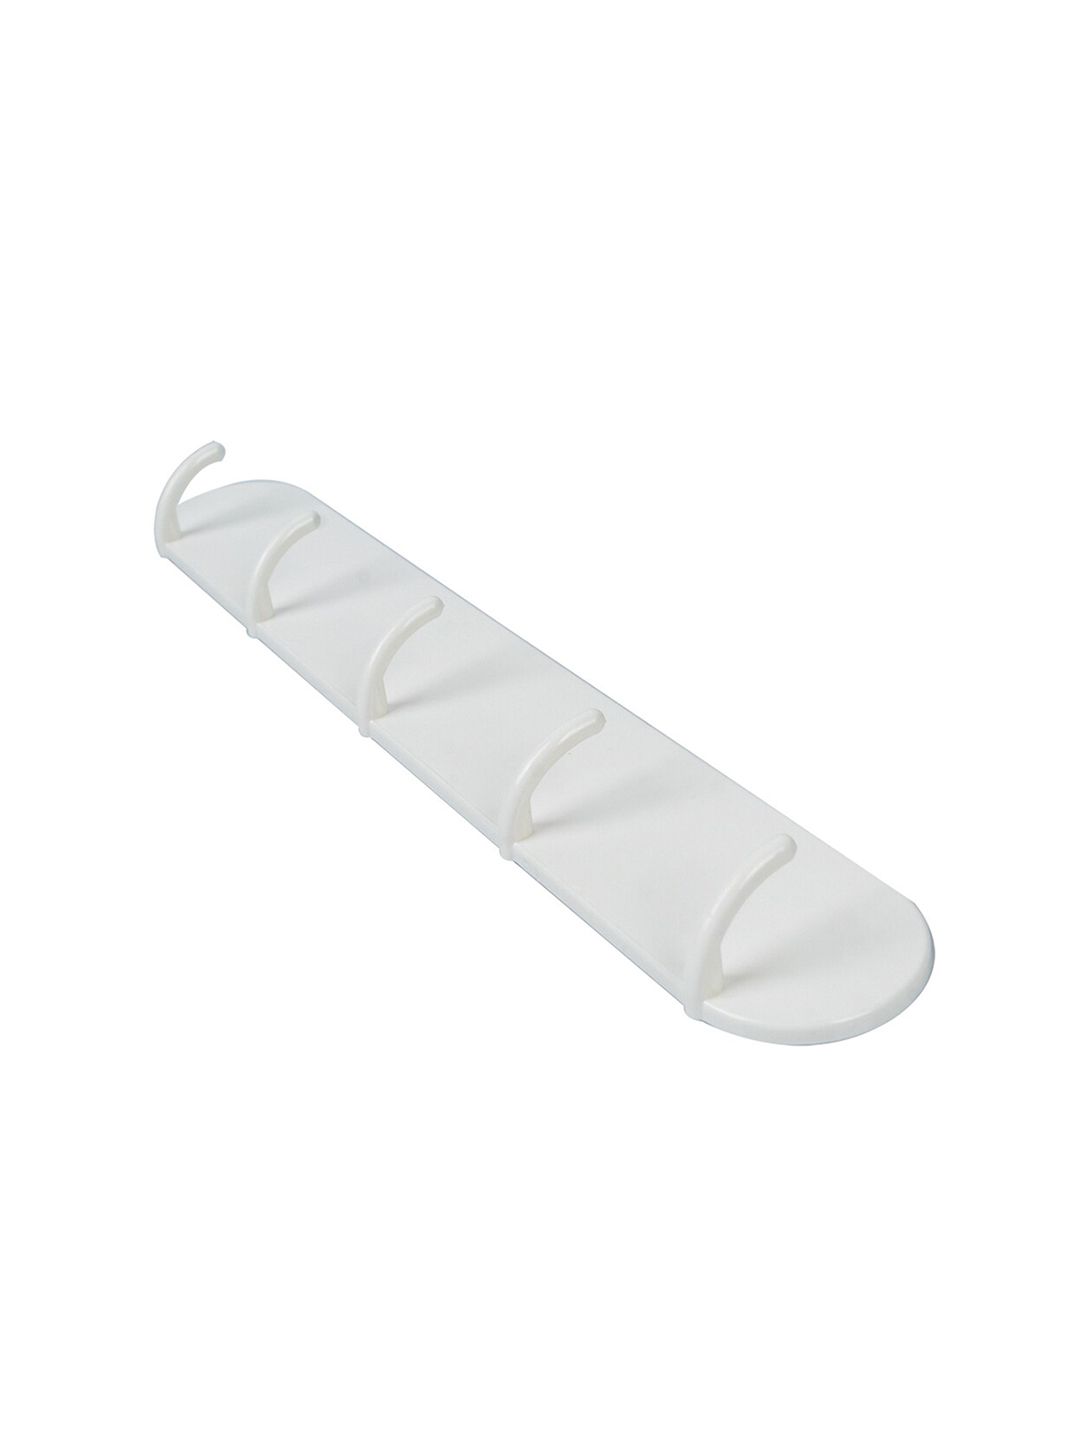 MARKET99 White Solid Wall Sticky Hooks and Holders Price in India